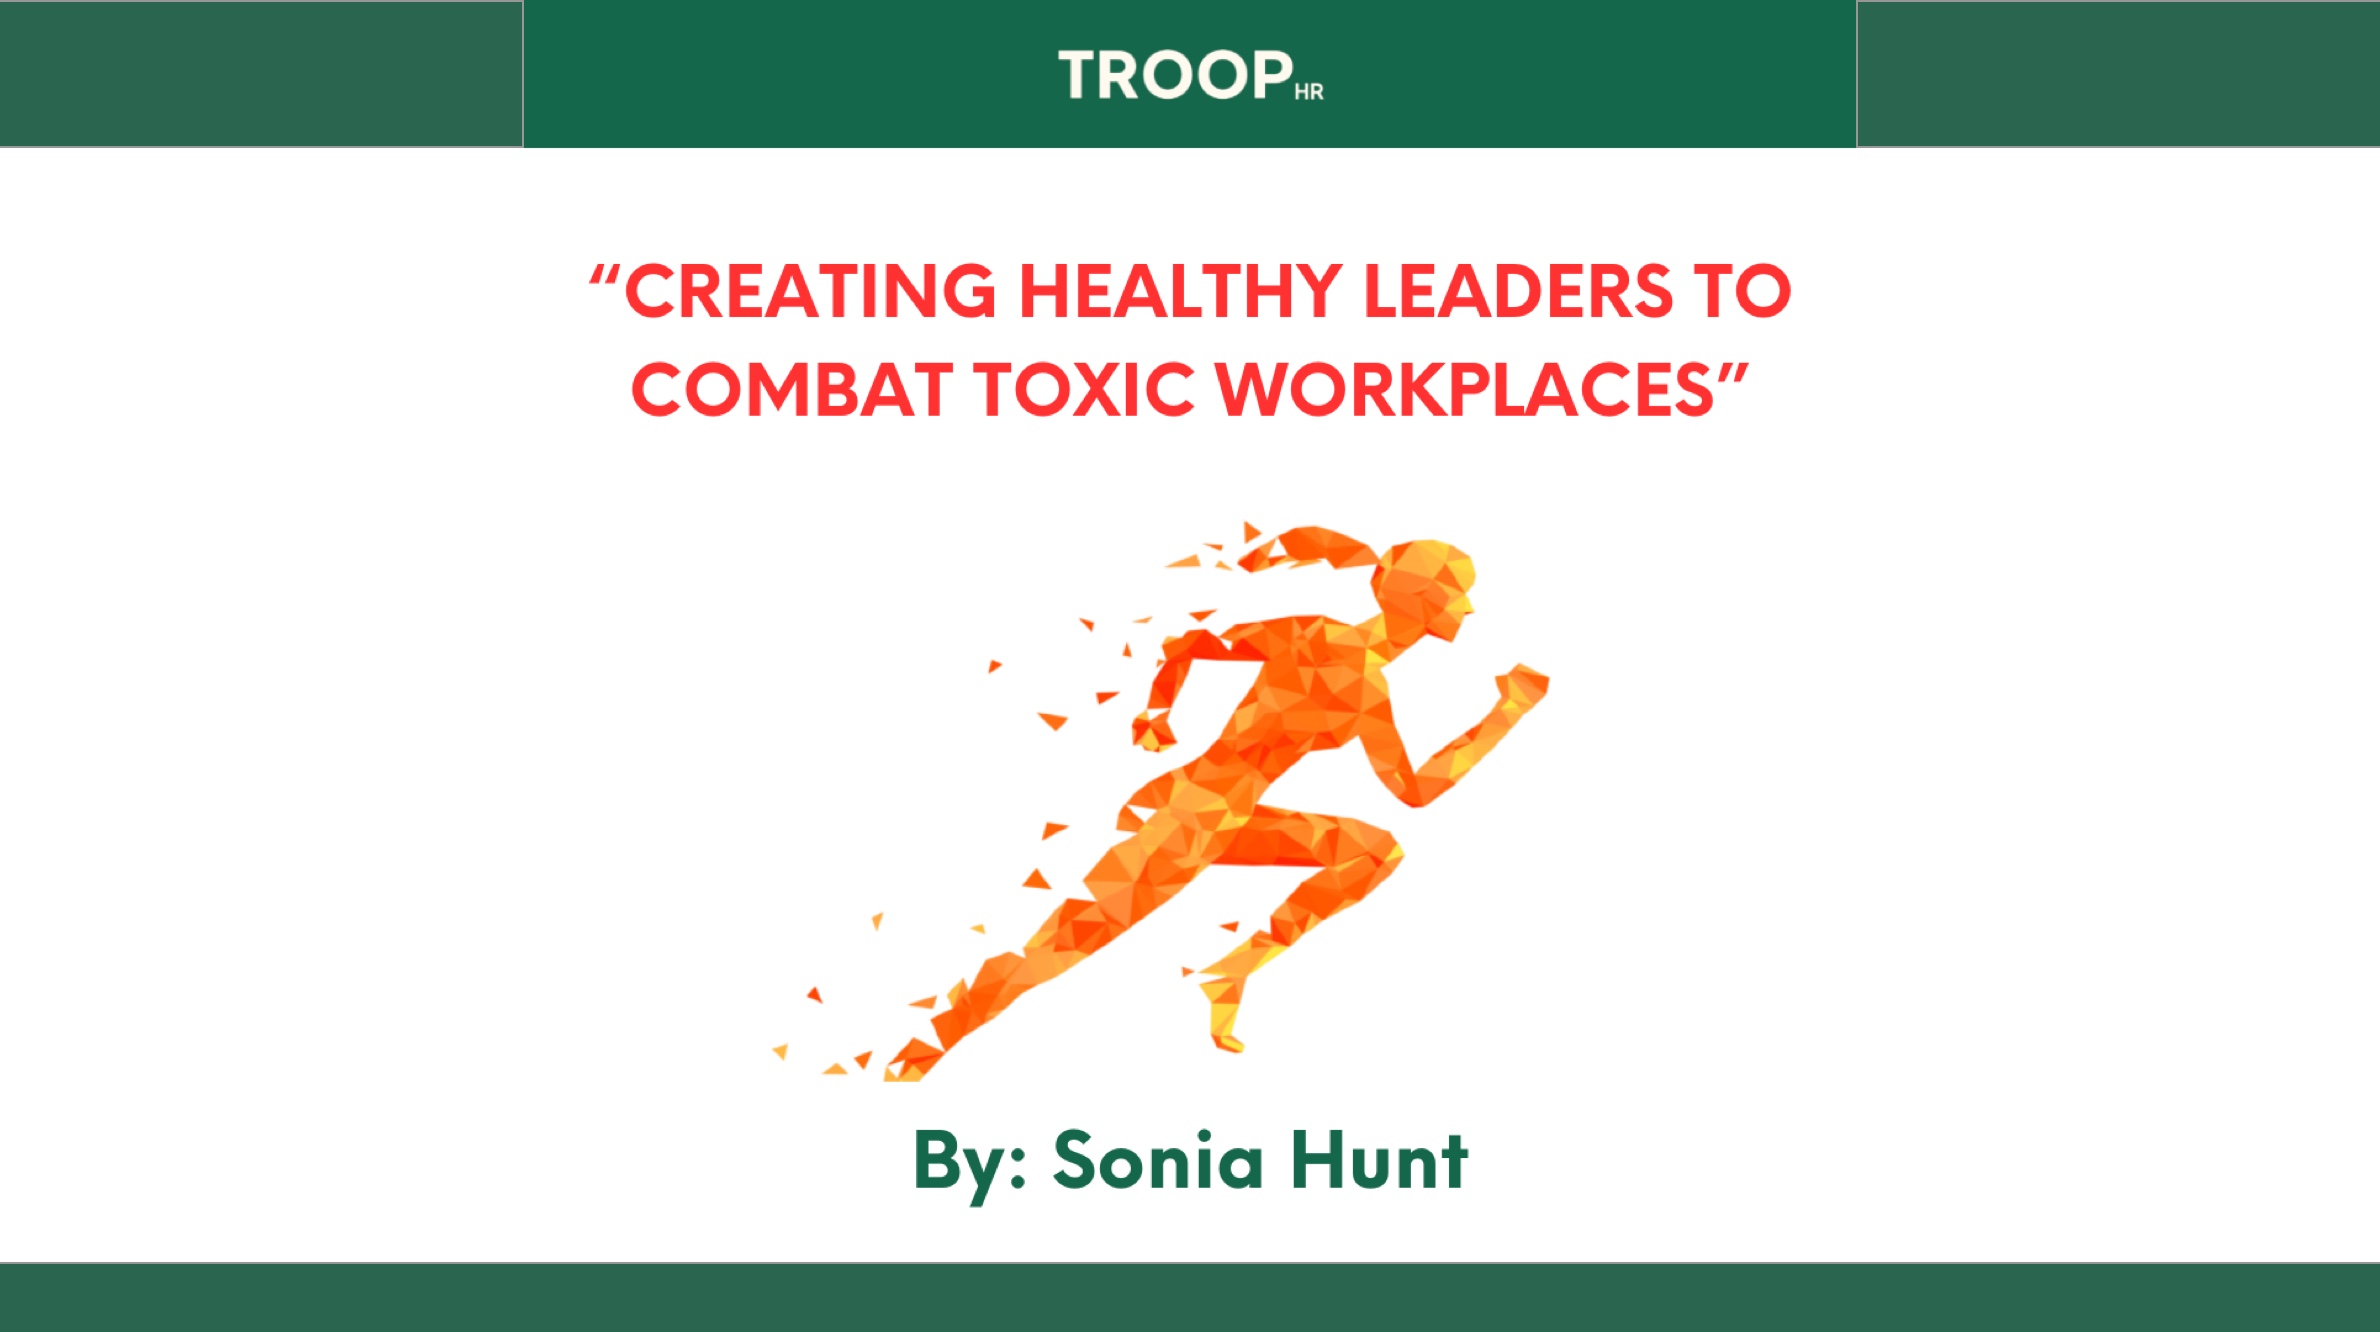 Creating Healthy Leaders to Combat Toxic Workplaces by Sonia Hunt via TroopHR